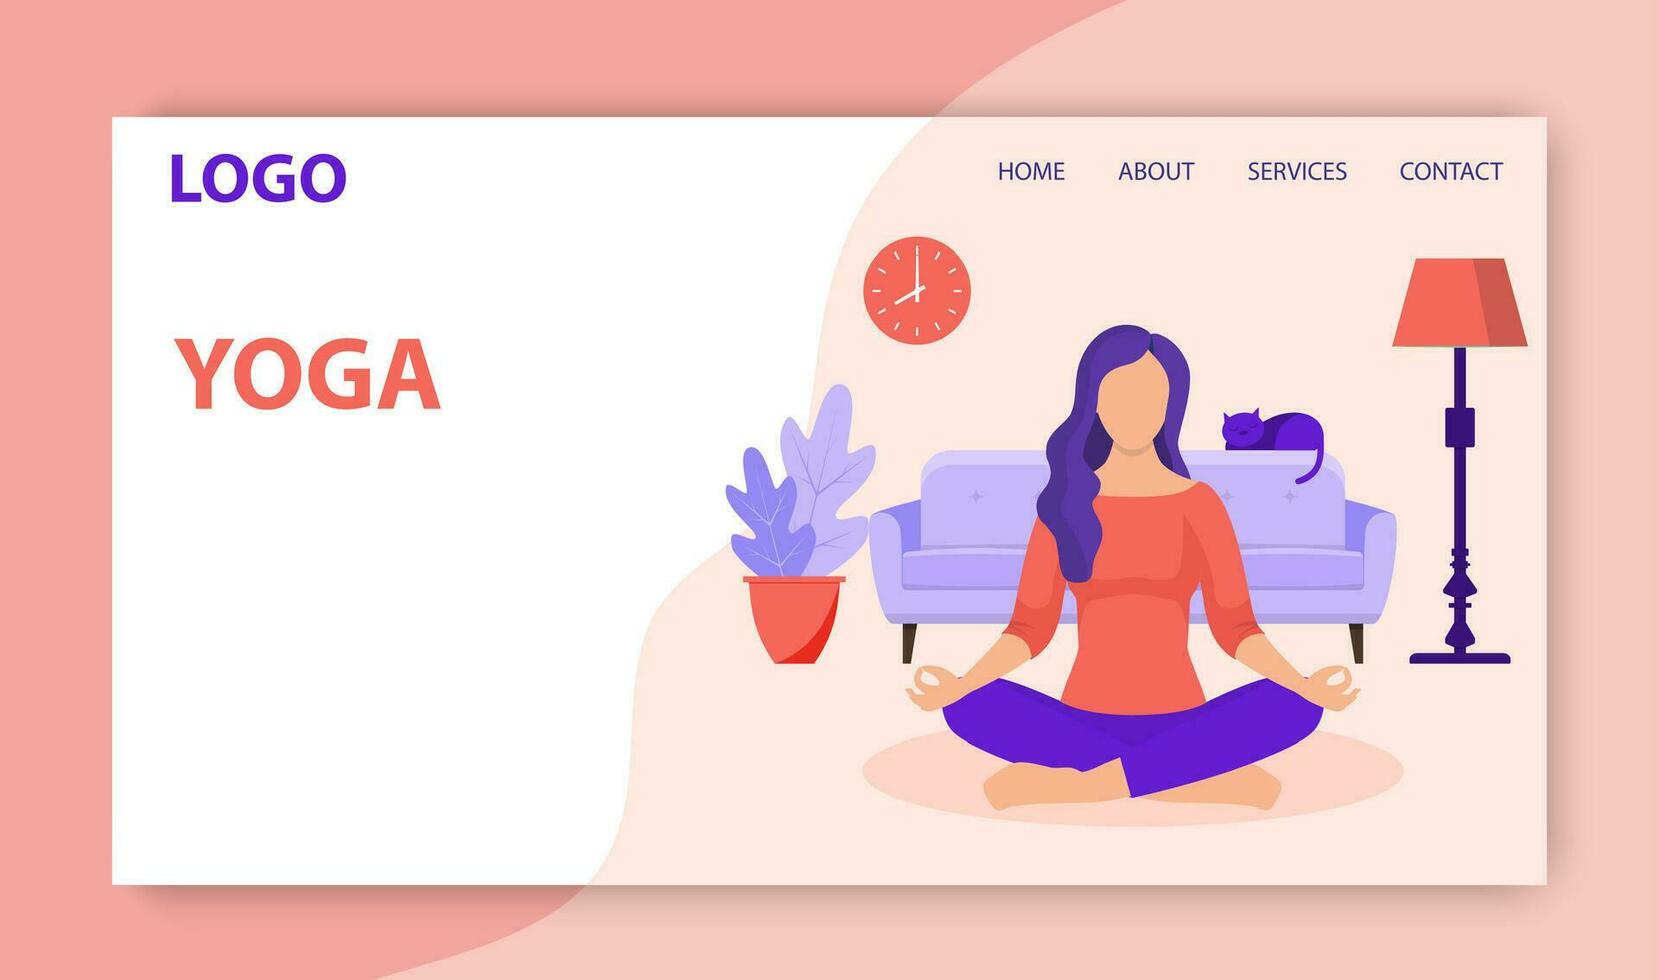 Yoga at home. Concept design for poster, banner, flyer, web page. Young woman sitting in yoga lotus pose. Landing page design template. Vector illustration in flat style